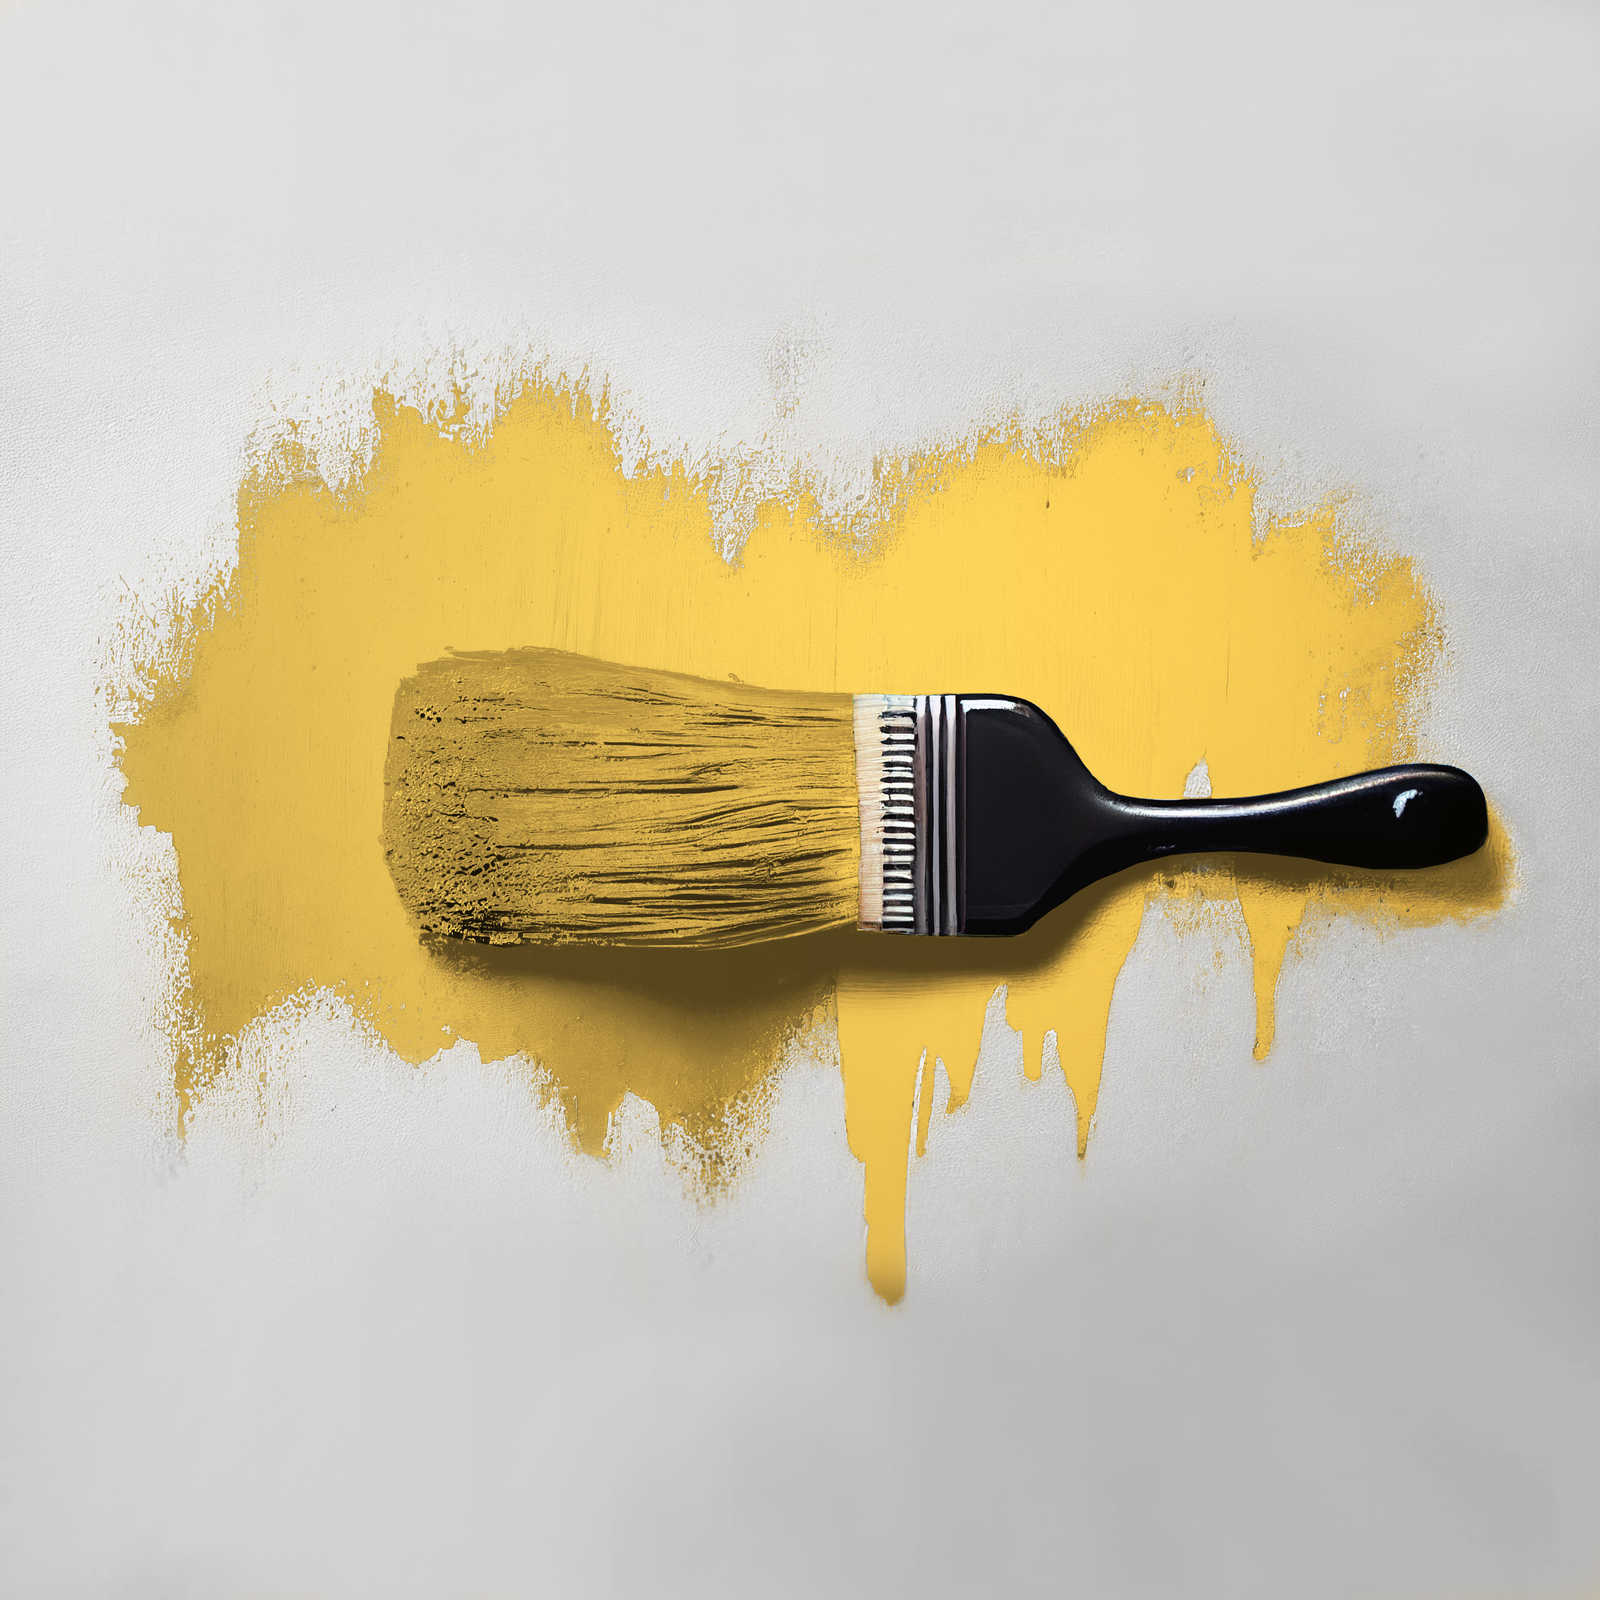             Wall Paint TCK5003 »Mighty Mango« in bright yellow – 5.0 litre
        